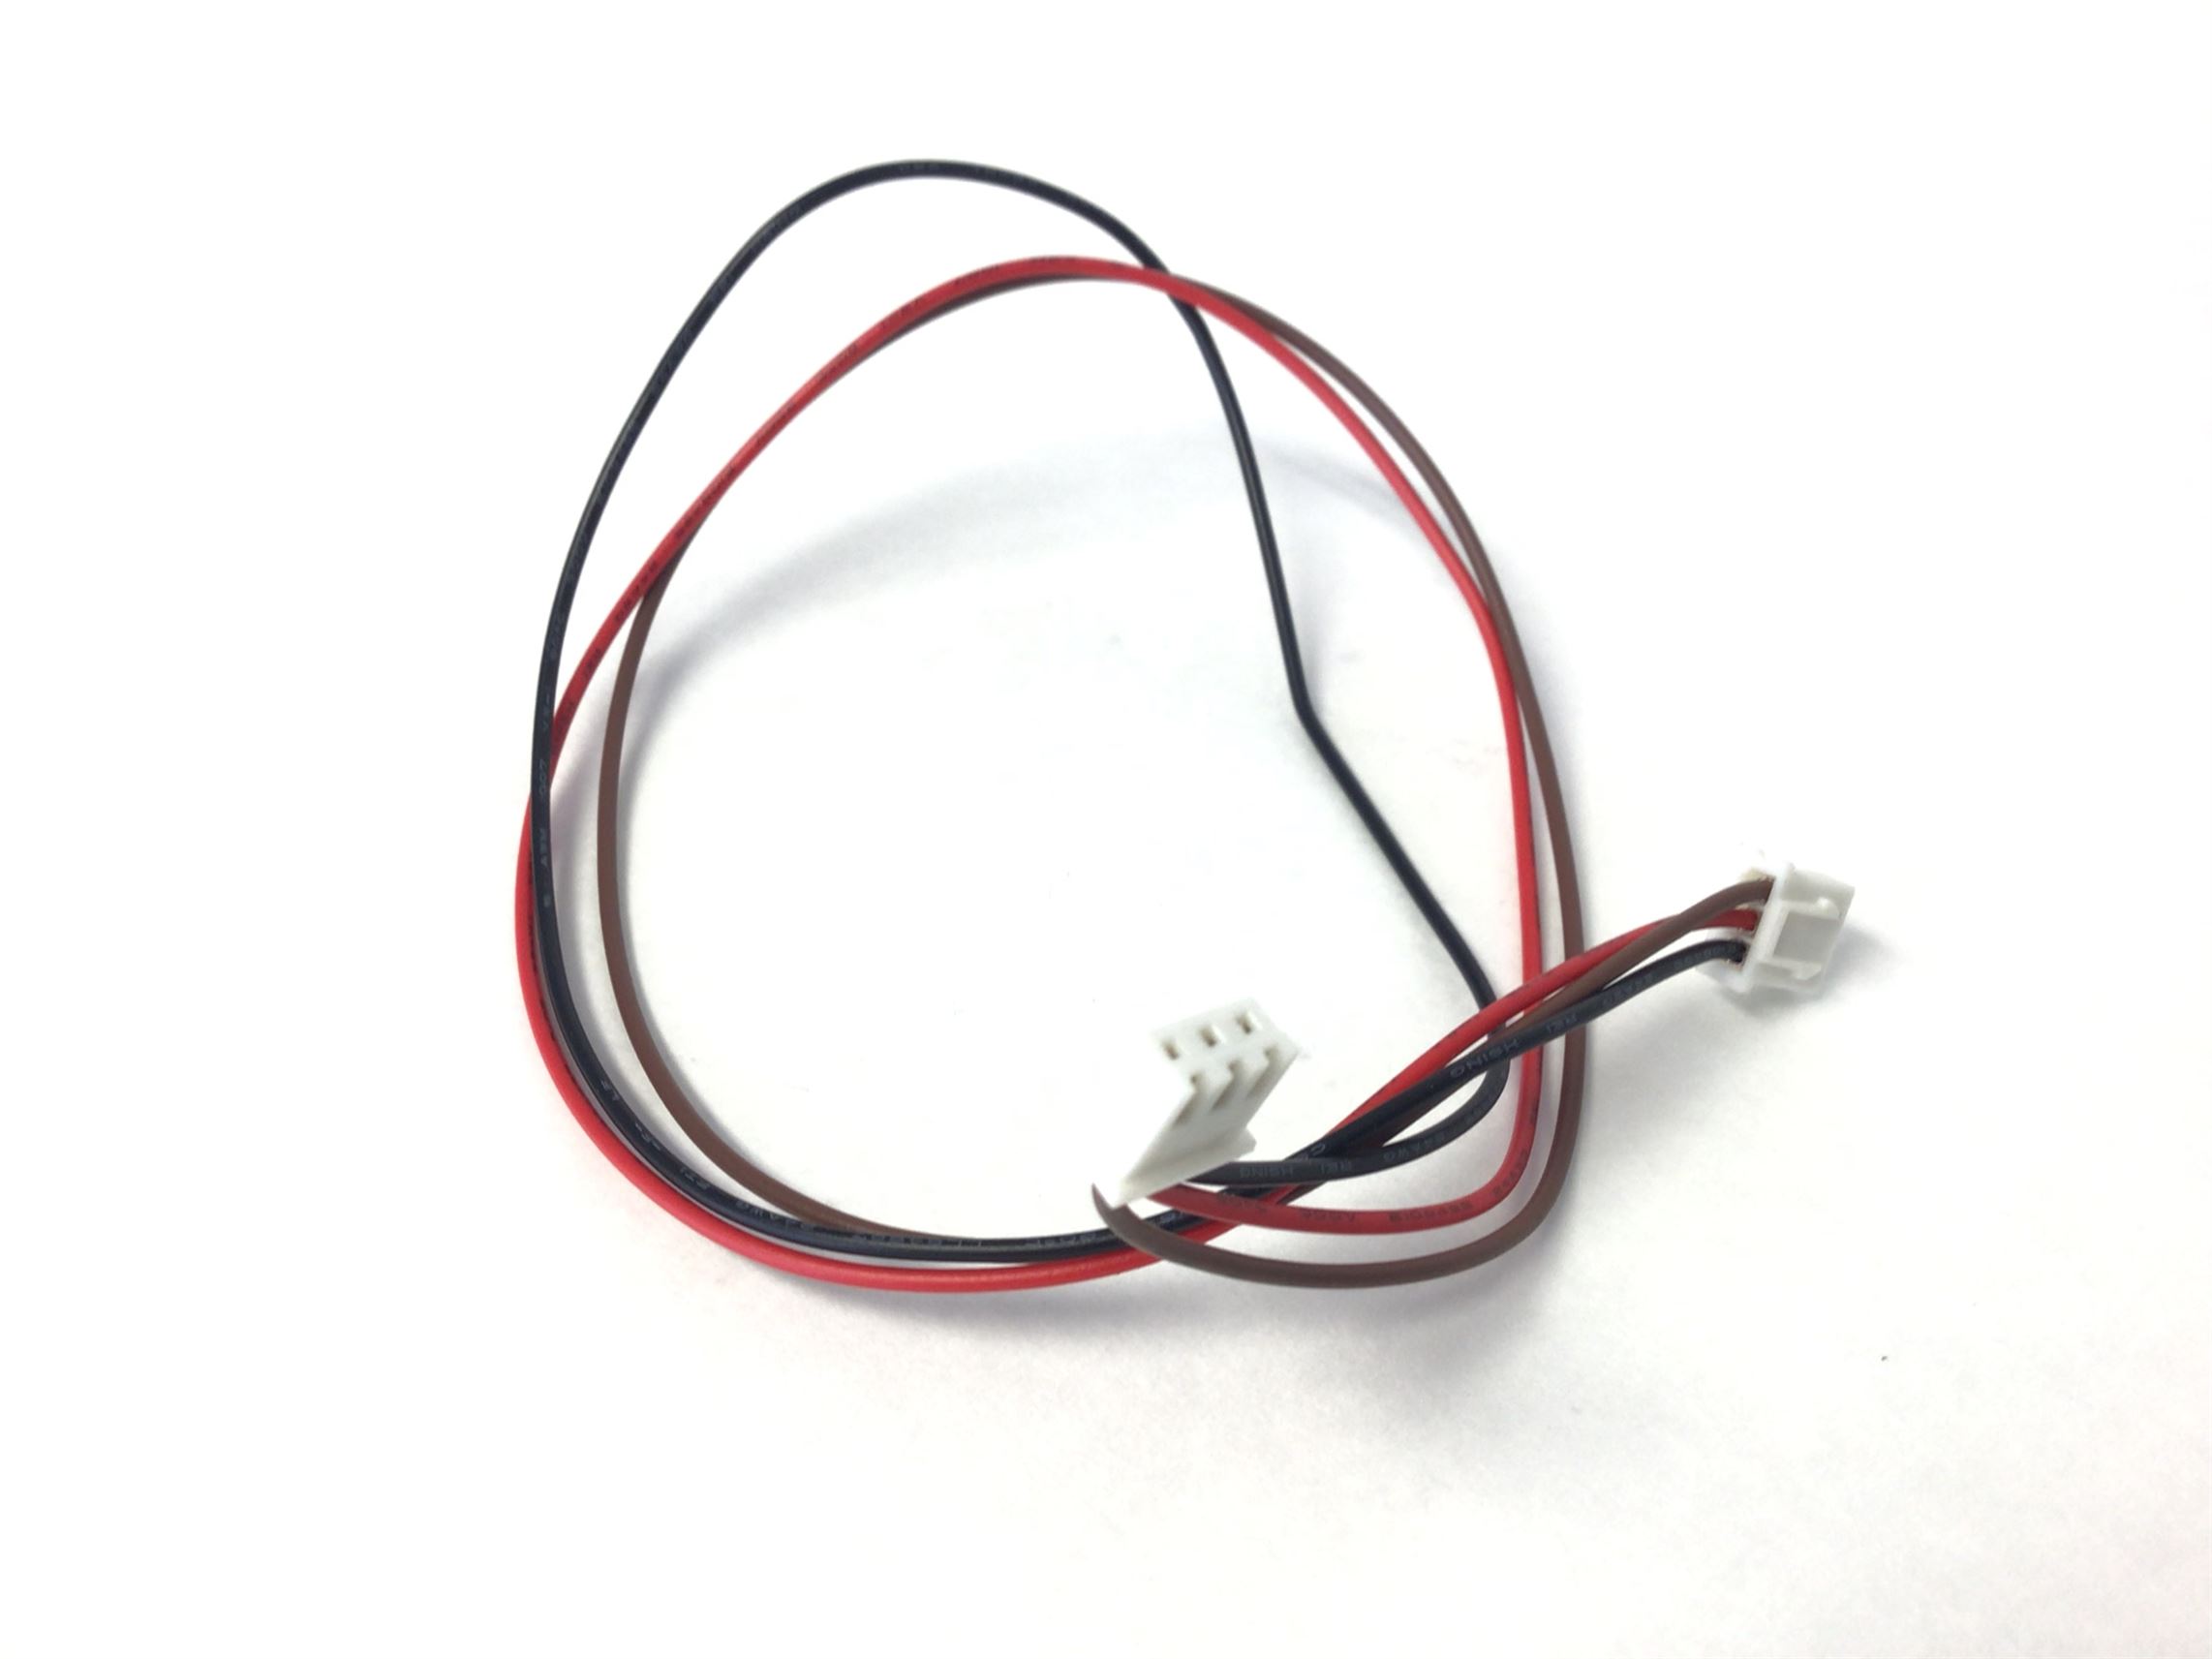 3 pin Wire red black white (Used)